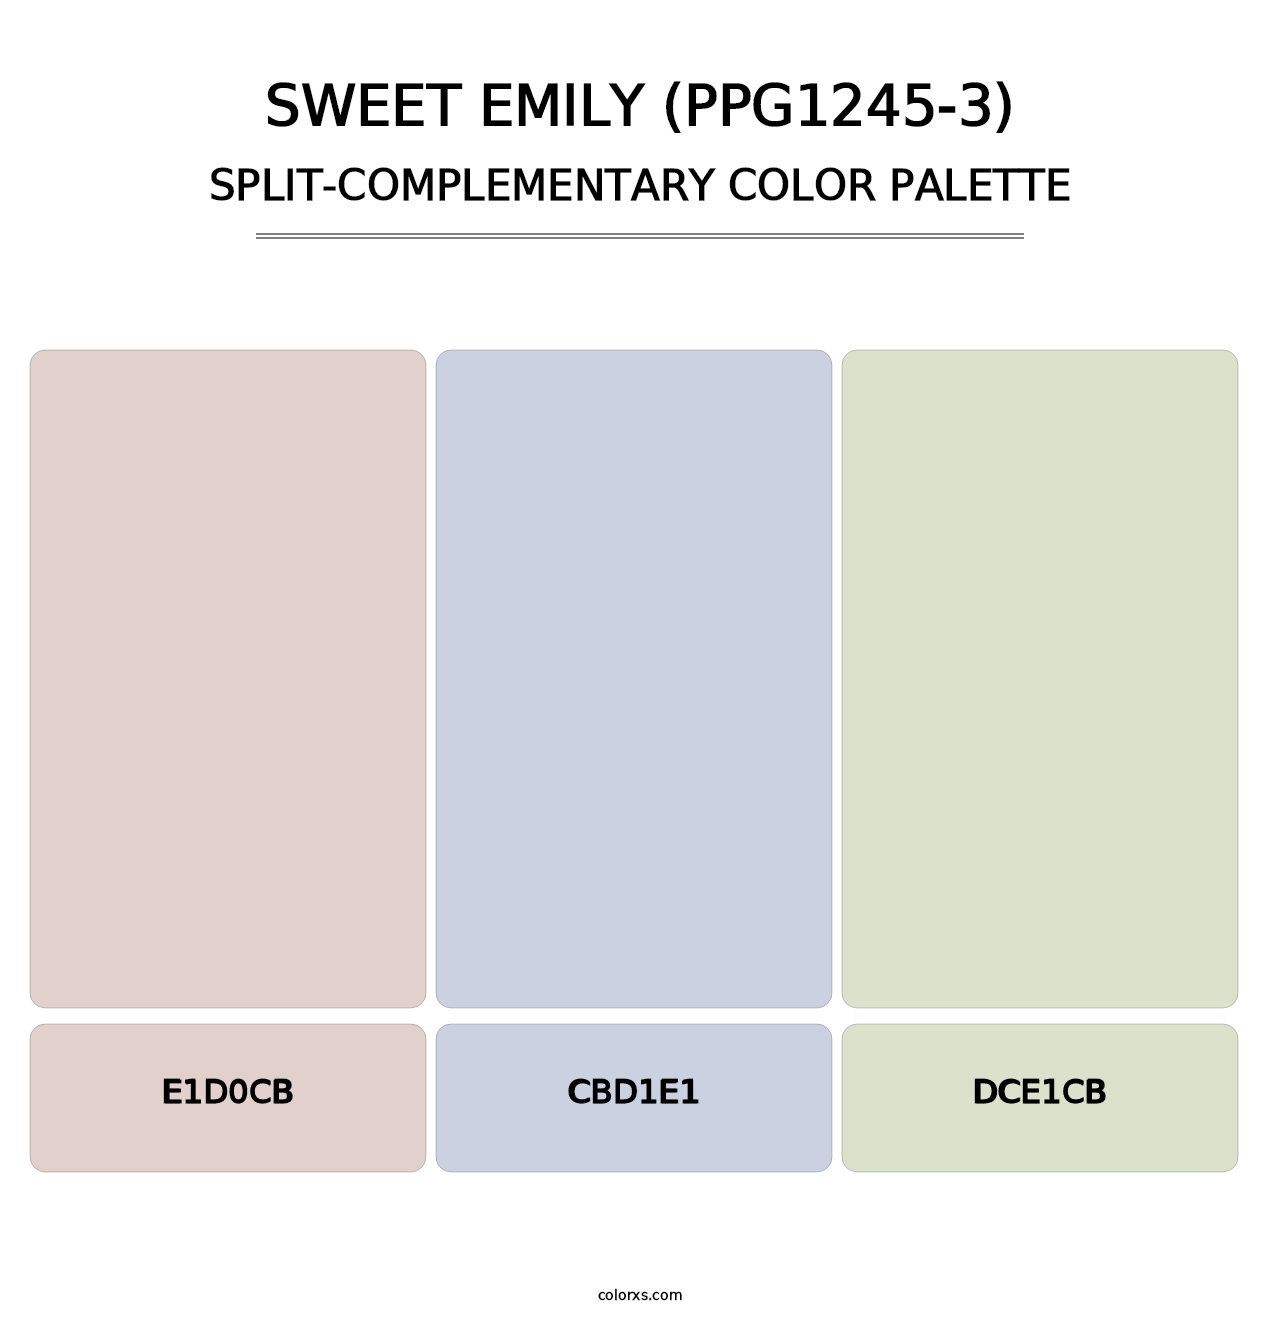 Sweet Emily (PPG1245-3) - Split-Complementary Color Palette